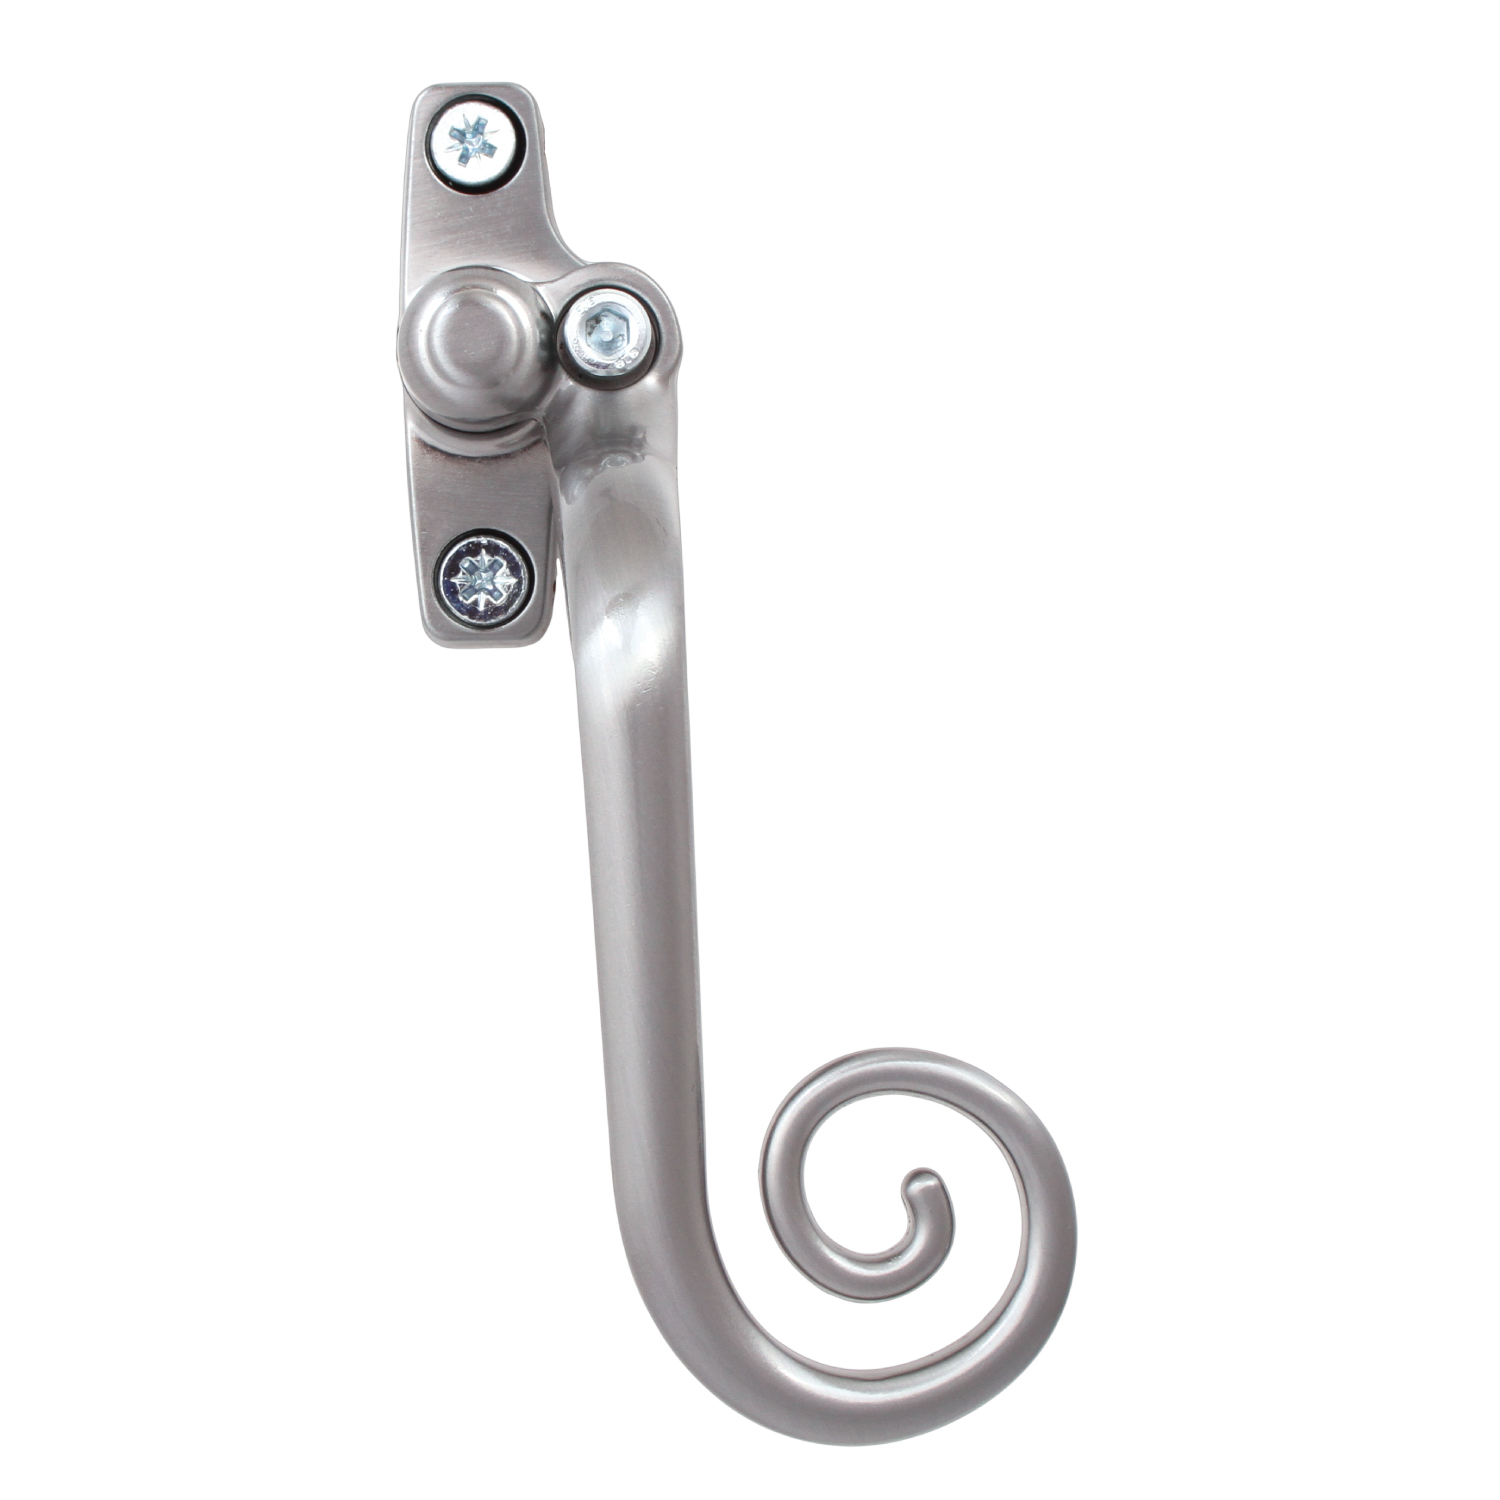 Monkey Tail Window Handle Right Hand